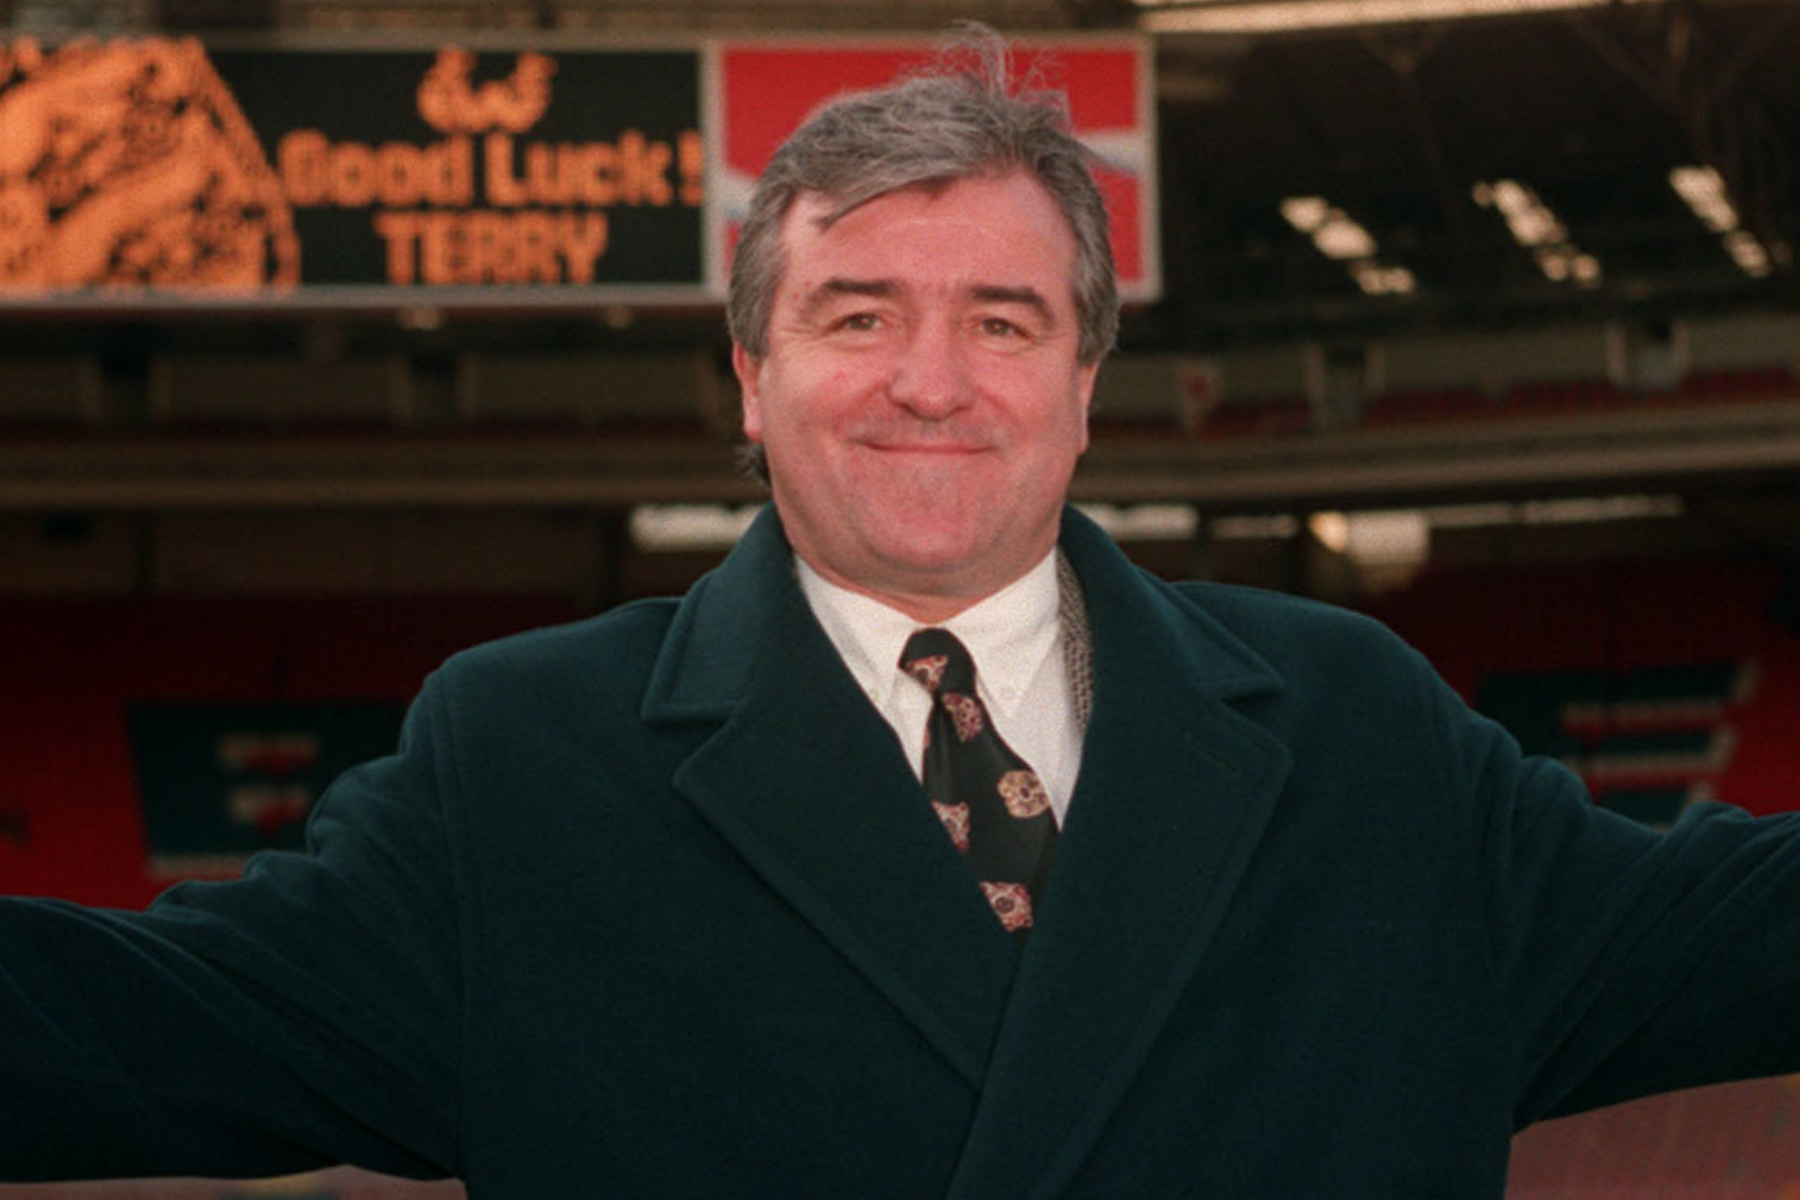 Tributes paid to Terry Venables following death aged 80